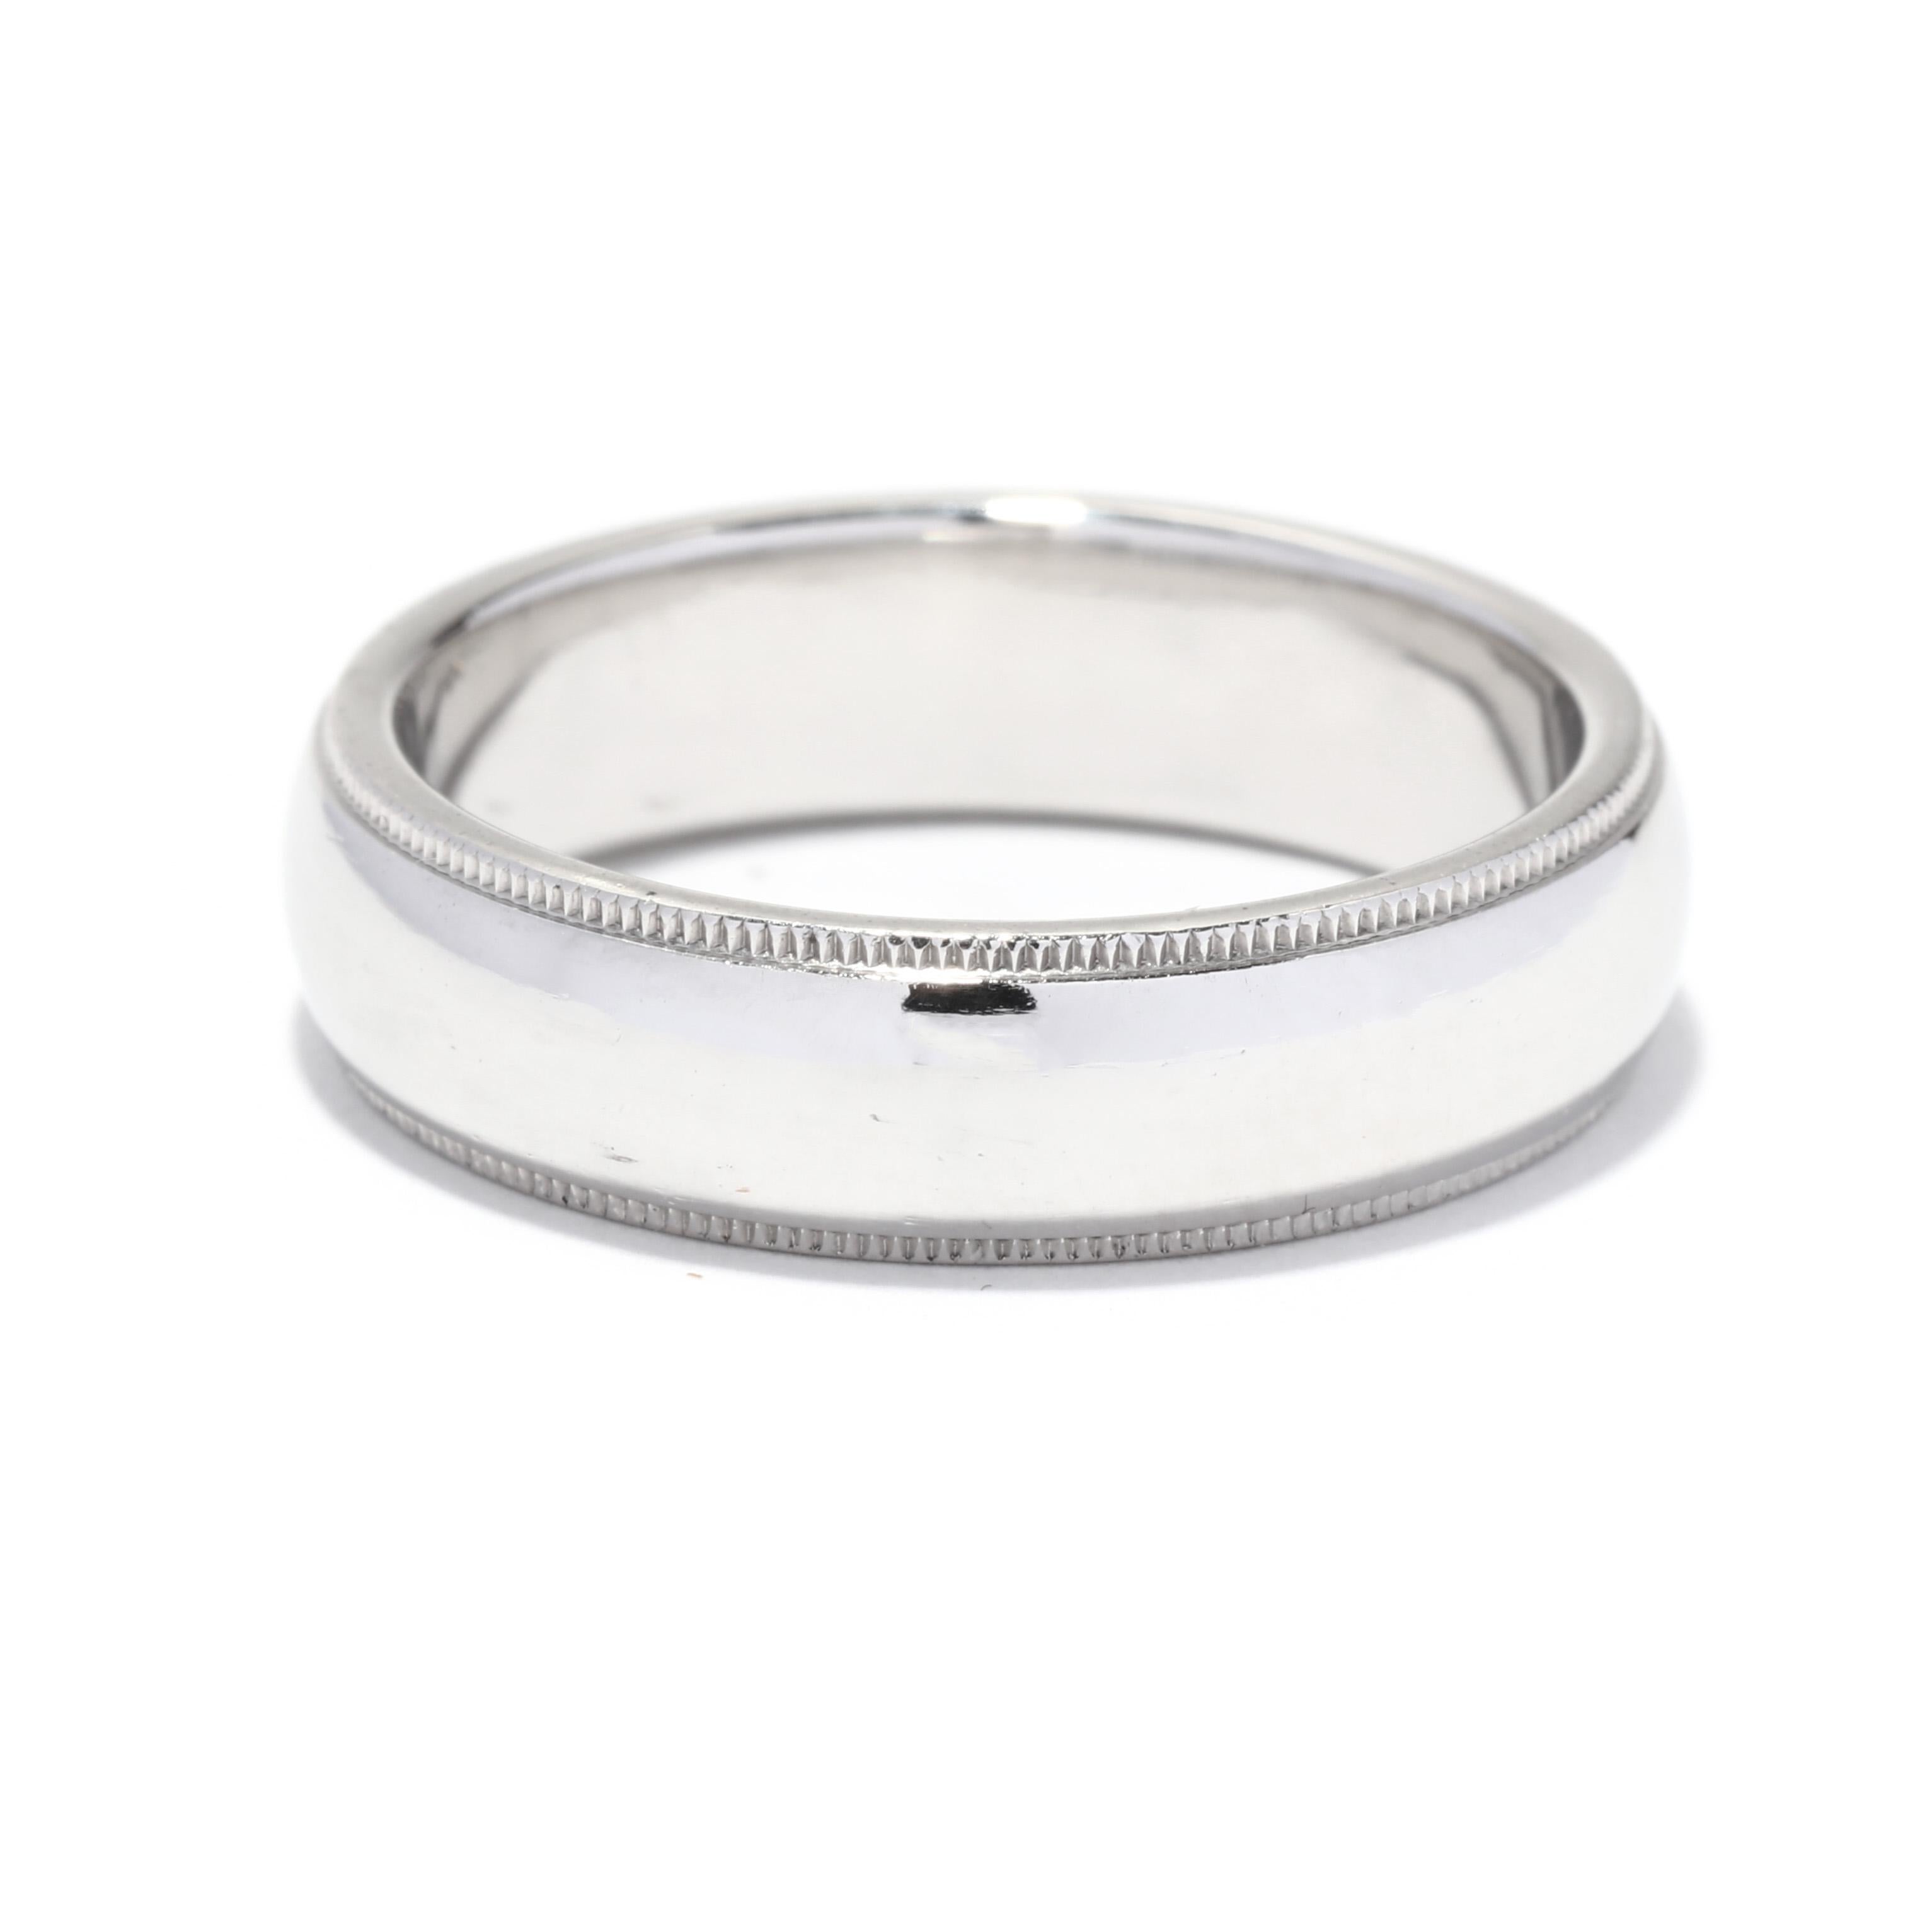 A vintage Tiffany and Company classic milgrain platinum wedding band. This wide gent's band features a slightly domed design with milgrain detailing in an eternity design.

Ring Size 10

Width: 6 mm

Weight: 9.6 dwts. / 14.93 grams

Stamps: TIFFANY